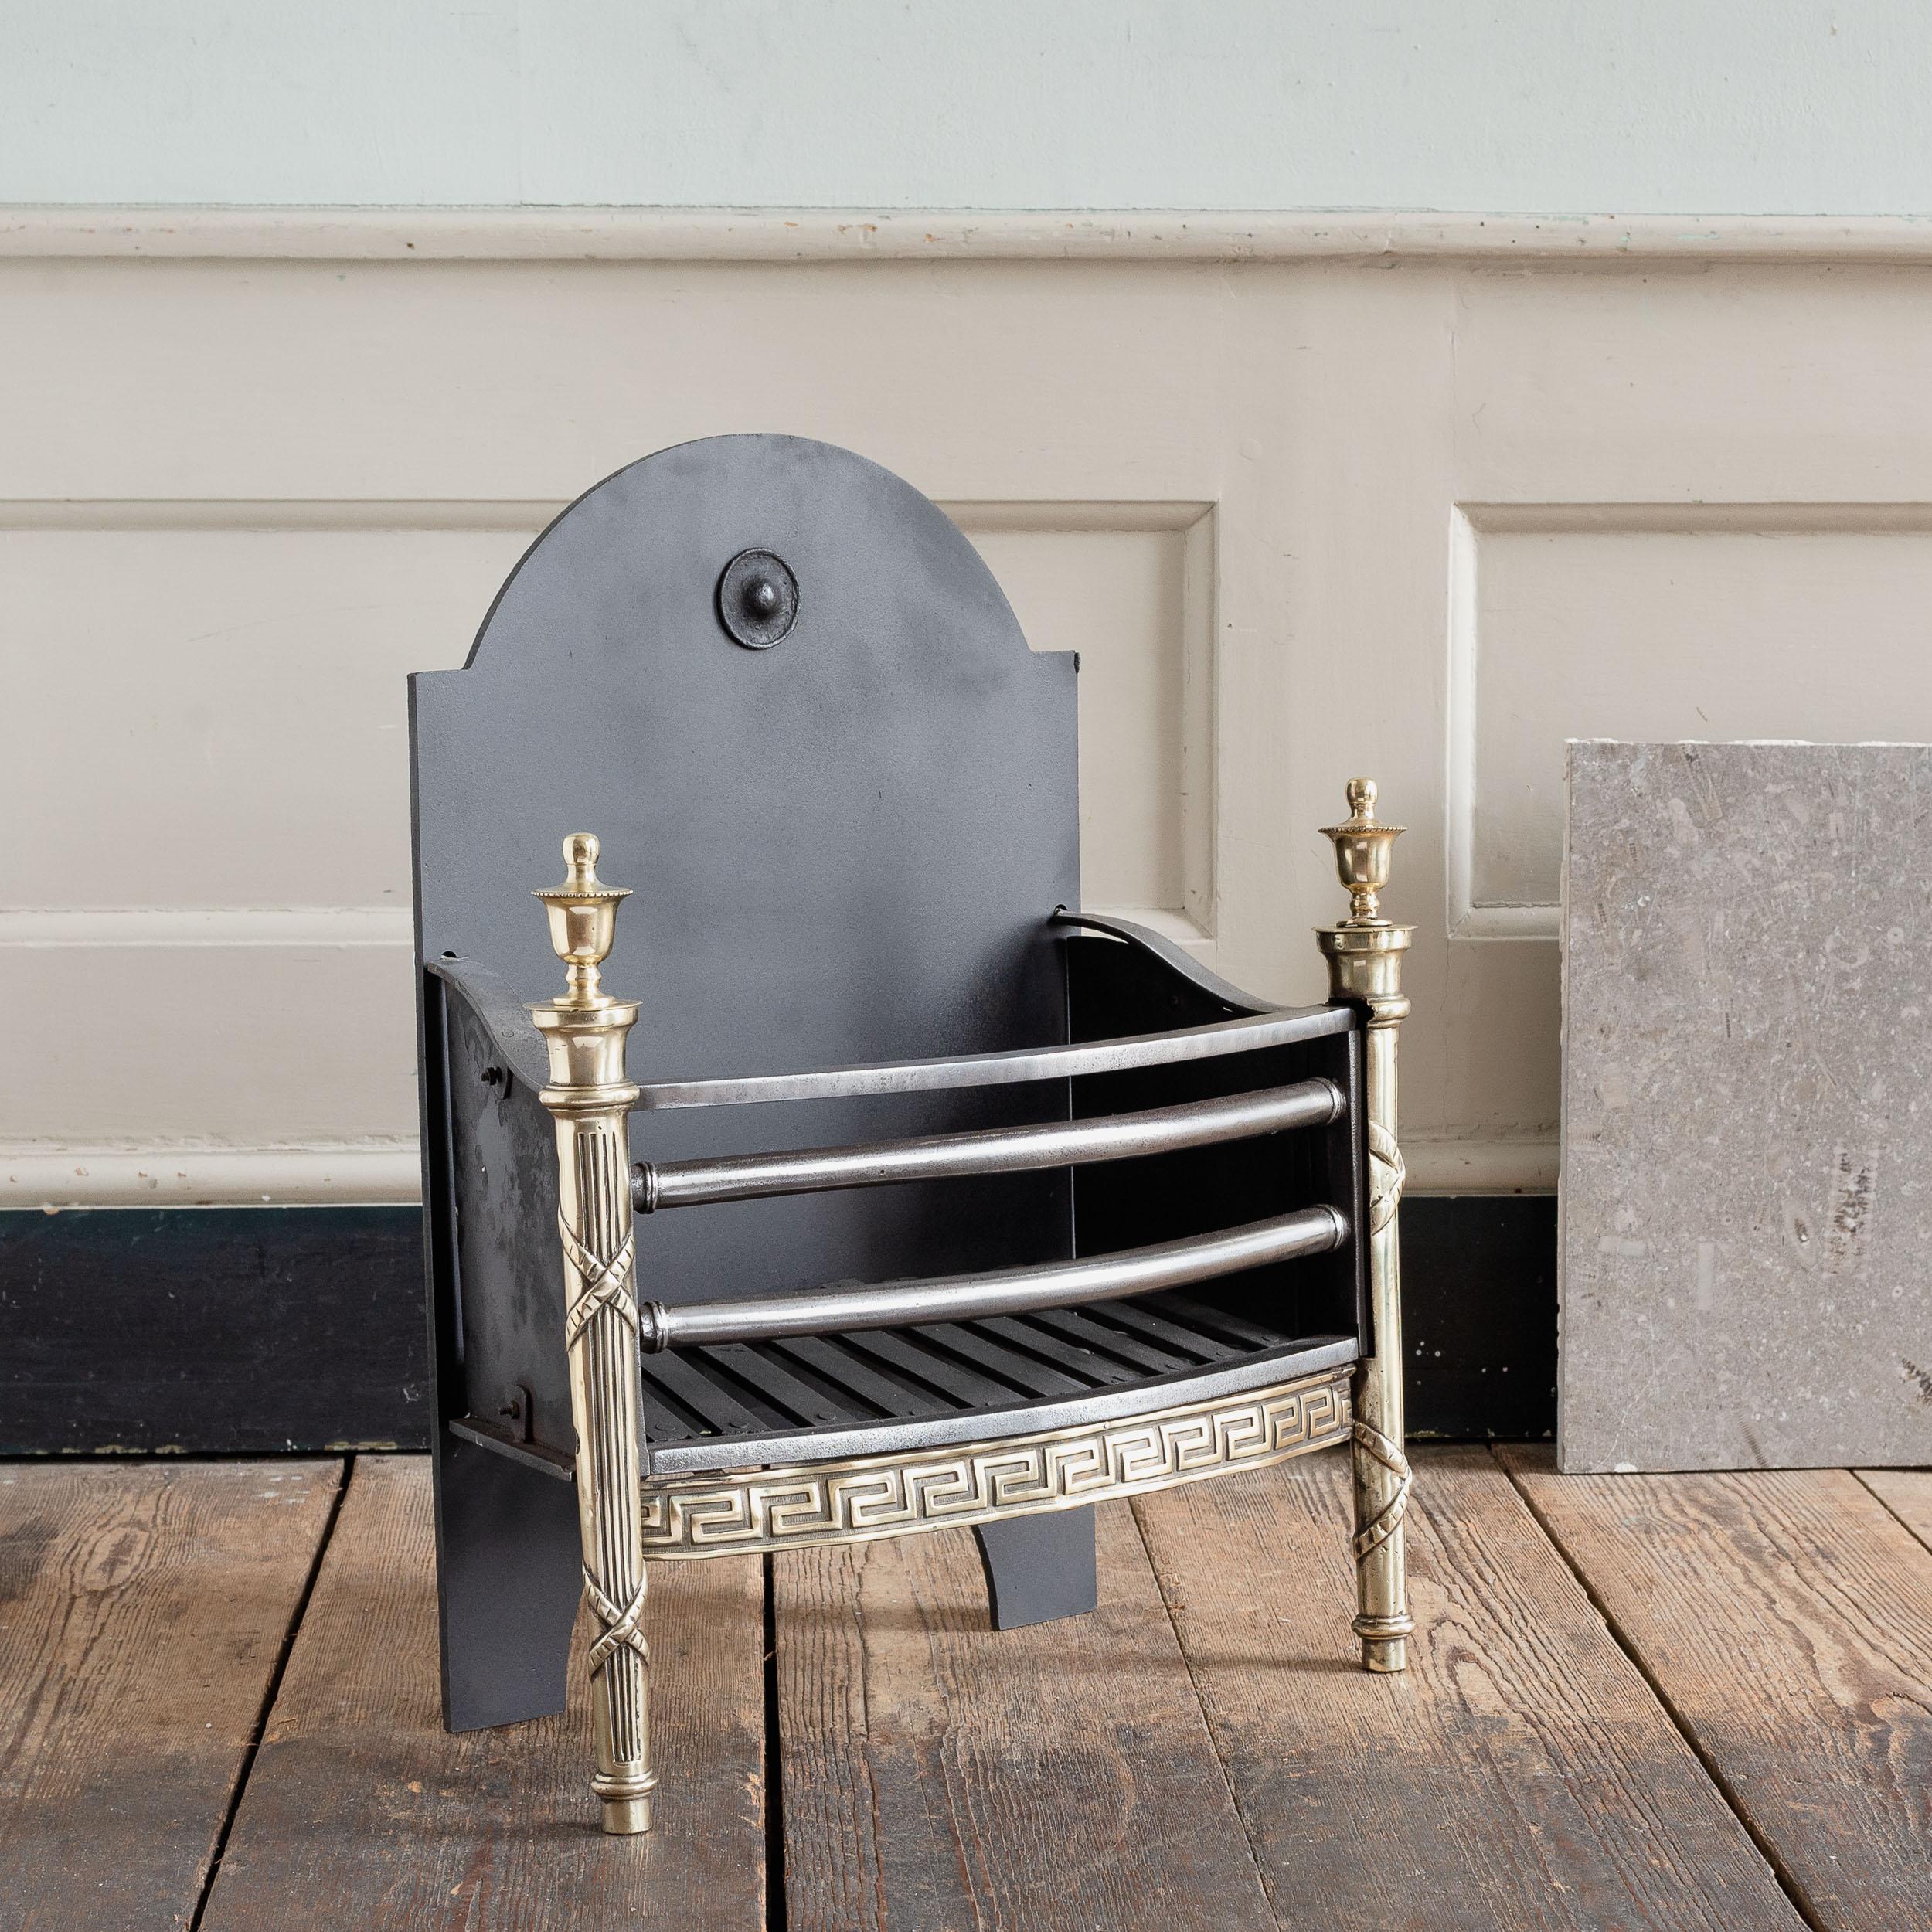 An English brass and steel fire basket, mid-twentieth century in the Regency style,
with urn-topped tapered standards and Greek-key apron. A smart and stylish fire grate with well-cast decorative elements, restored, repolished and ready for